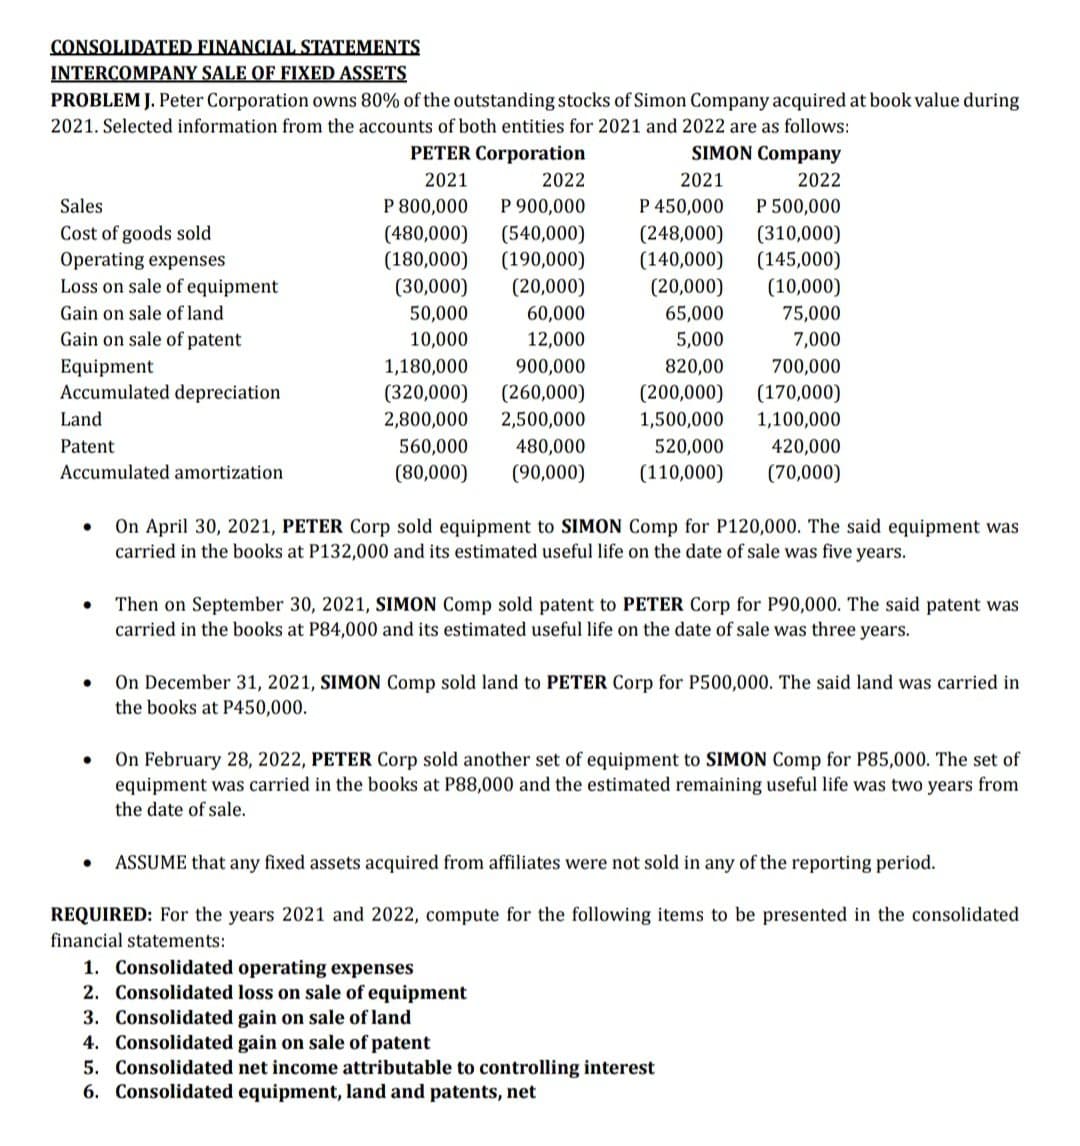 CONSOLIDATED FINANCIAL STATEMENTS
INTERCOMPANY SALE OF FIXED ASSETS
PROBLEM J. Peter Corporation owns 80% of the outstanding stocks of Simon Company acquired at book value during
2021. Selected information from the accounts of both entities for 2021 and 2022 are as follows:
PETER Corporation
SIMON Company
2021
2022
2021
2022
P 900,000
P 450,000
(248,000)
(140,000)
(20,000)
Sales
P 800,000
P 500,000
Cost of goods sold
Operating expenses
Loss on sale of equipment
(480,000)
(180,000)
(30,000)
50,000
(540,000)
(190,000)
(20,000)
60,000
(310,000)
(145,000)
(10,000)
Gain on sale of land
65,000
75,000
Gain on sale of patent
10,000
12,000
5,000
7,000
Equipment
Accumulated depreciation
1,180,000
(320,000)
900,000
820,00
700,000
(260,000)
2,500,000
(200,000)
1,500,000
(170,000)
1,100,000
Land
2,800,000
520,000
(110,000)
Patent
560,000
480,000
420,000
Accumulated amortization
(80,000)
(90,000)
(70,000)
On April 30, 2021, PETER Corp sold equipment to SIMON Comp for P120,000. The said equipment was
carried in the books at P132,000 and its estimated useful life on the date of sale was five years.
Then on September 30, 2021, SIMON Comp sold patent to PETER Corp for P90,000. The said patent was
carried in the books at P84,000 and its estimated useful life on the date of sale was three years.
On December 31, 2021, SIMON Comp sold land to PETER Corp for P500,000. The said land was carried in
the books at P450,000.
On February 28, 2022, PETER Corp sold another set of equipment to SIMON Comp for P85,000. The set of
equipment was carried in the books at P88,000 and the estimated remaining useful life was two years from
the date of sale.
ASSUME that any fixed assets acquired from affiliates were not sold in any of the reporting period.
REQUIRED: For the years 2021 and 2022, compute for the following items to be presented in the consolidated
financial statements:
1. Consolidated operating expenses
2. Consolidated loss on sale of equipment
3. Consolidated gain on sale of land
4. Consolidated gain on sale of patent
5. Consolidated net income attributable to controlling interest
6. Consolidated equipment, land and patents, net
